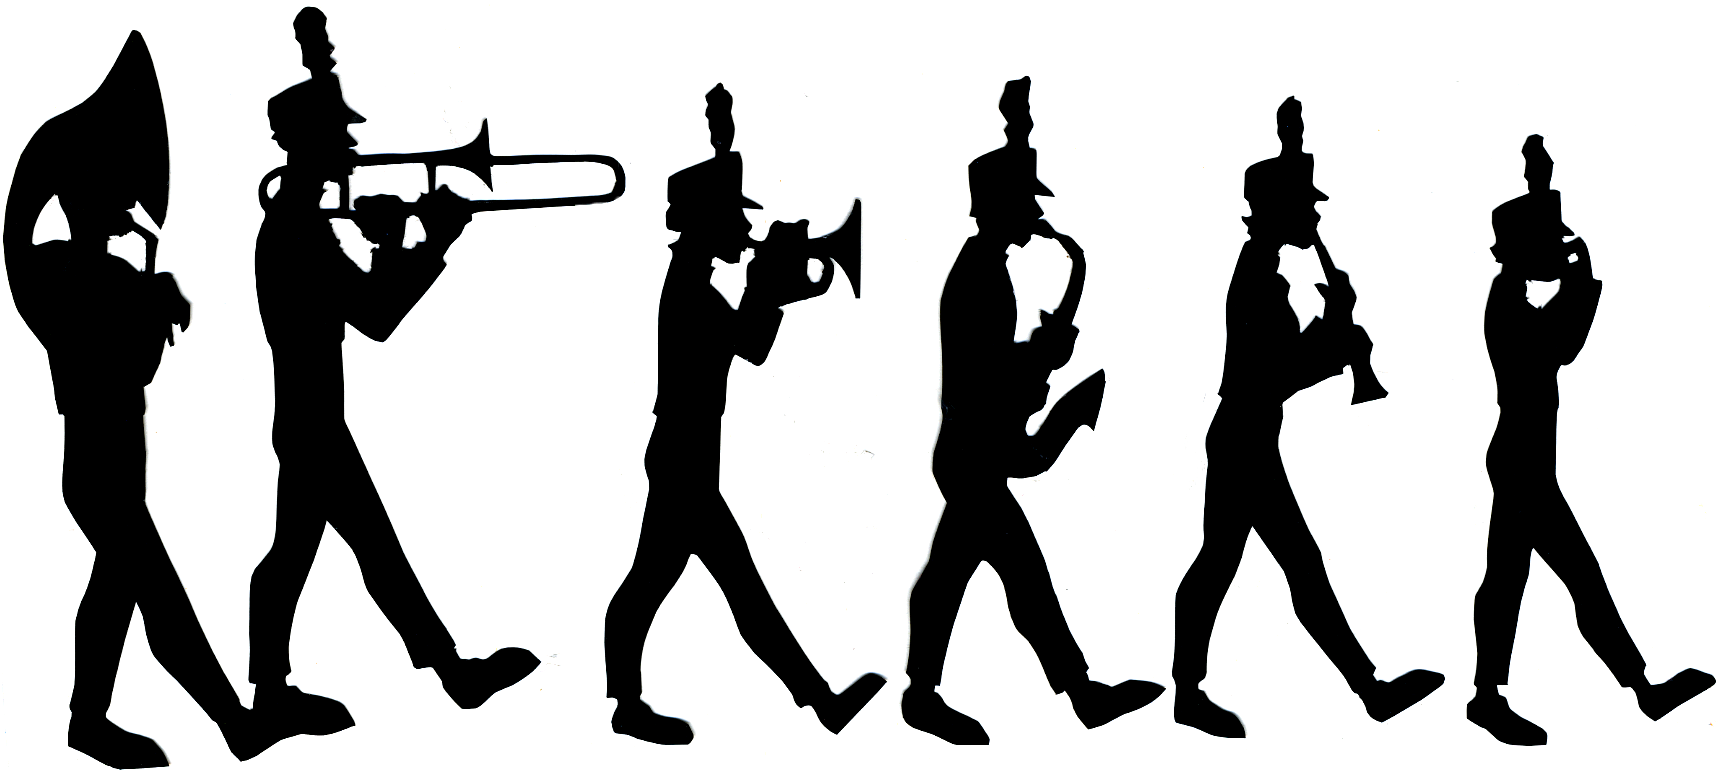 Clip art band and orchestra clipart 2 - dbclipart.com